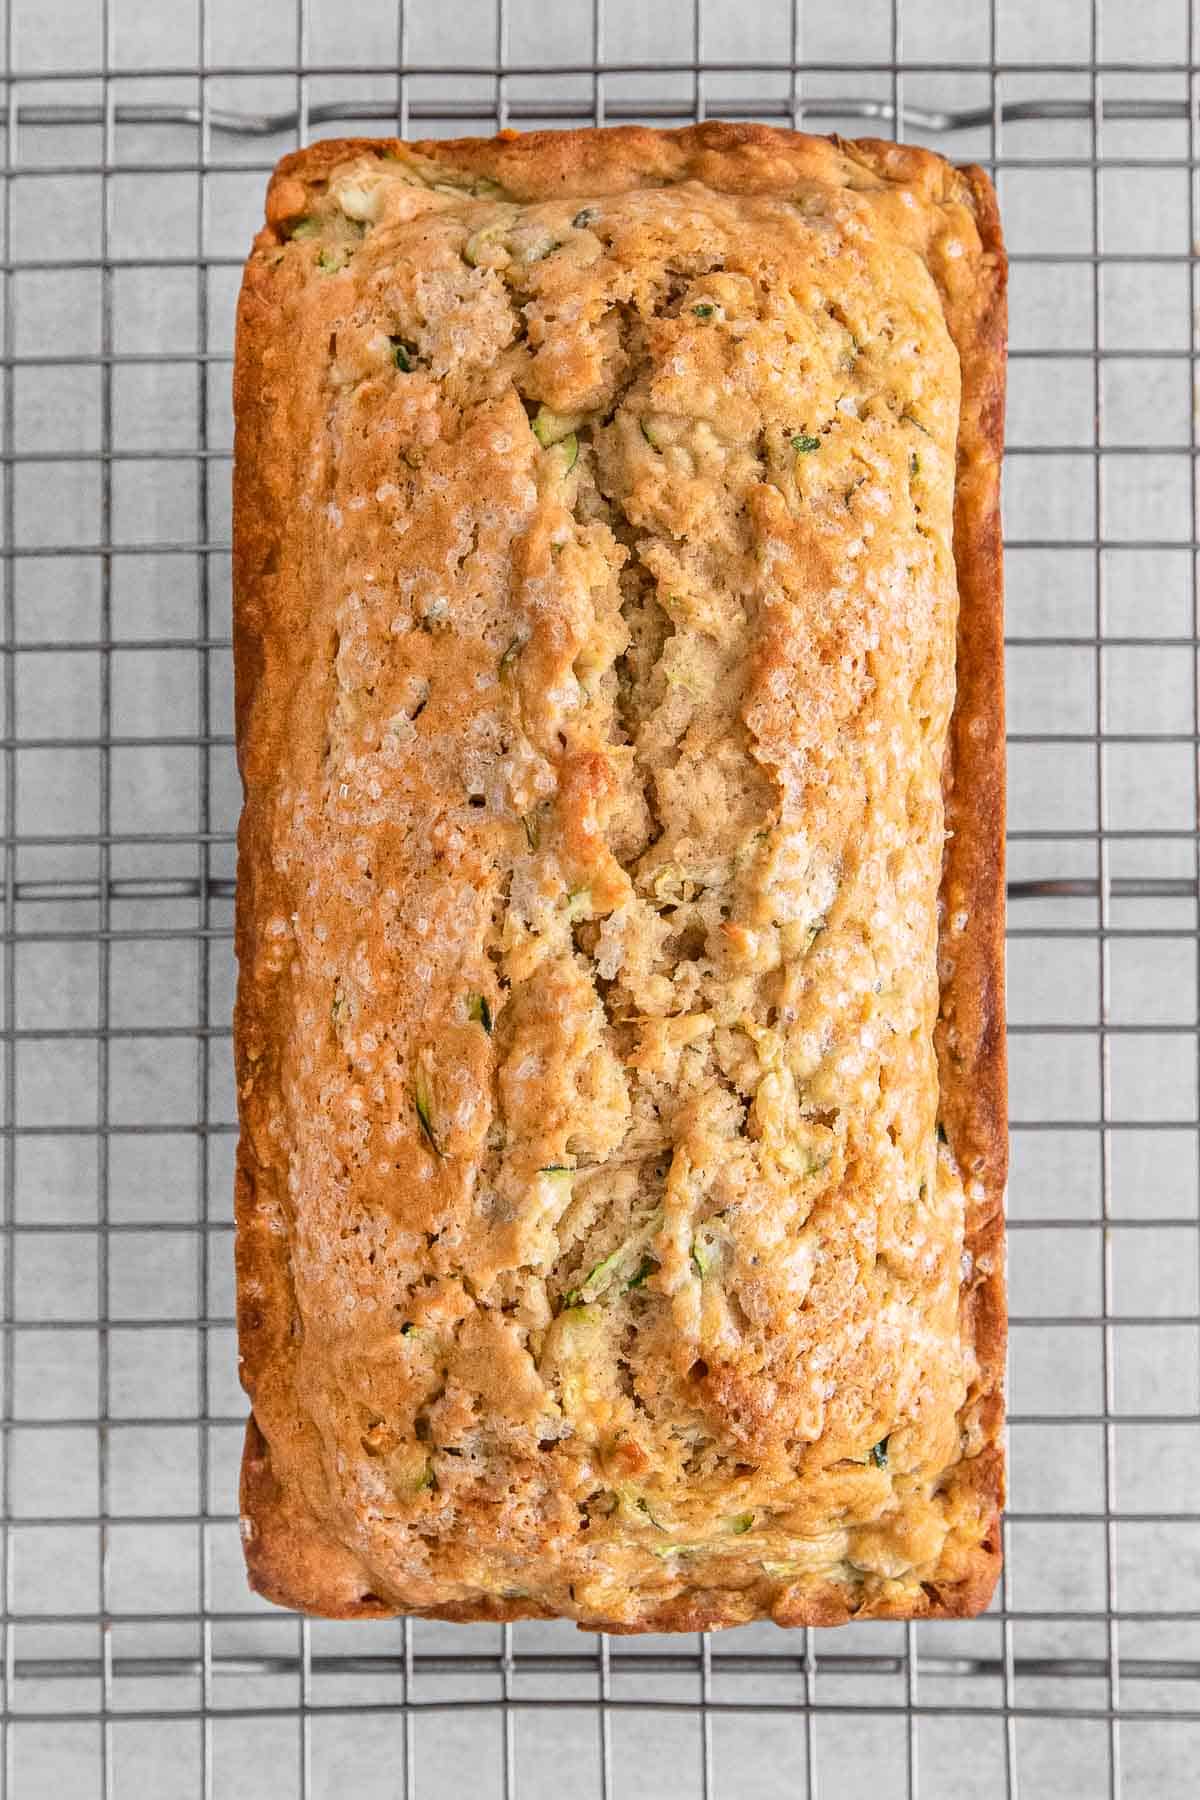 Baked zucchini bread on metal wire tray.